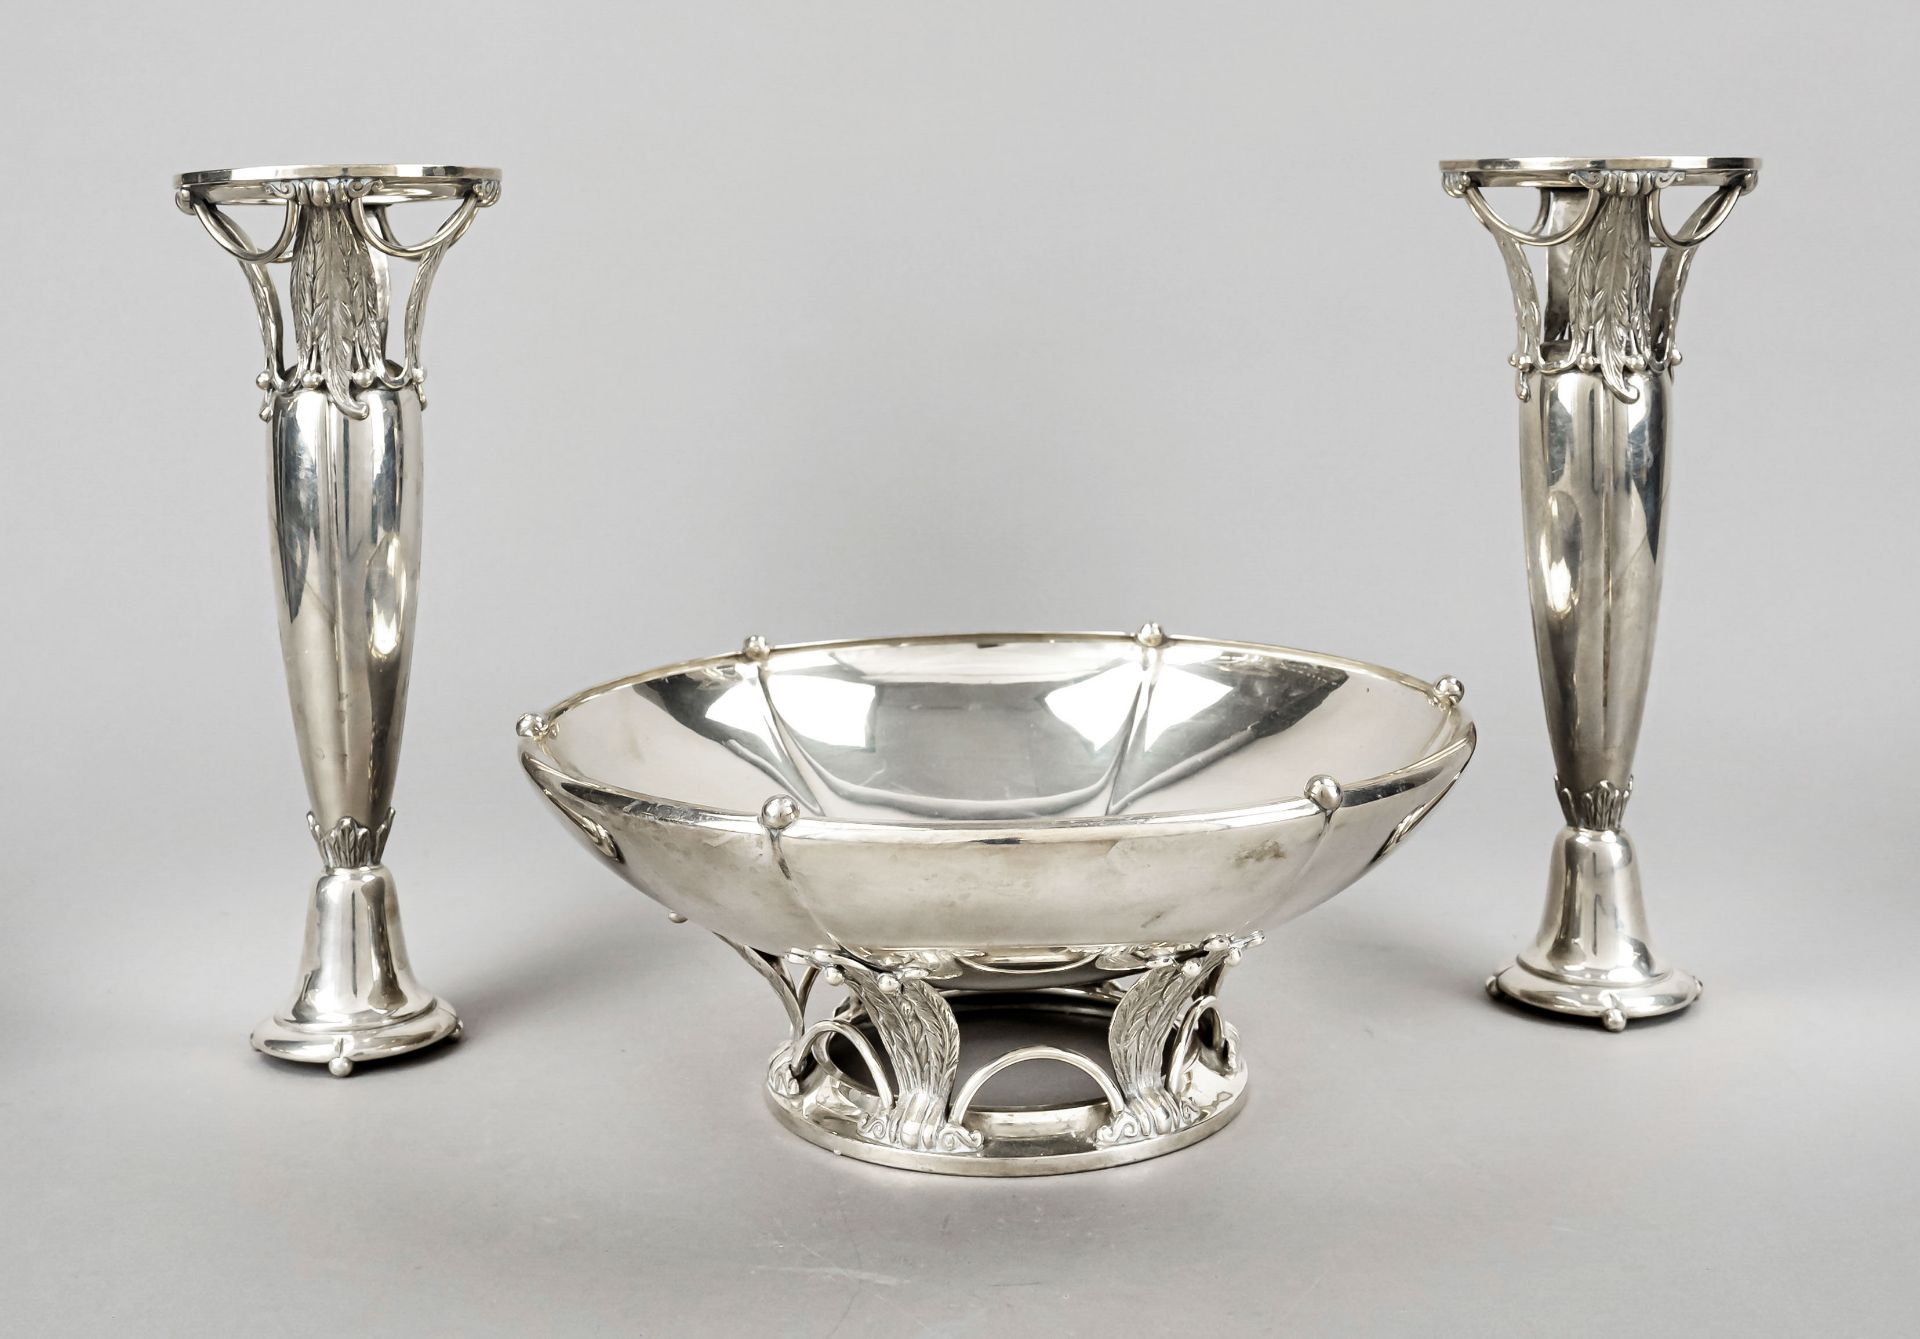 Round footed bowl and pair of candlesticks, USA, 1st half 20th century, maker's mark Richard Dimes